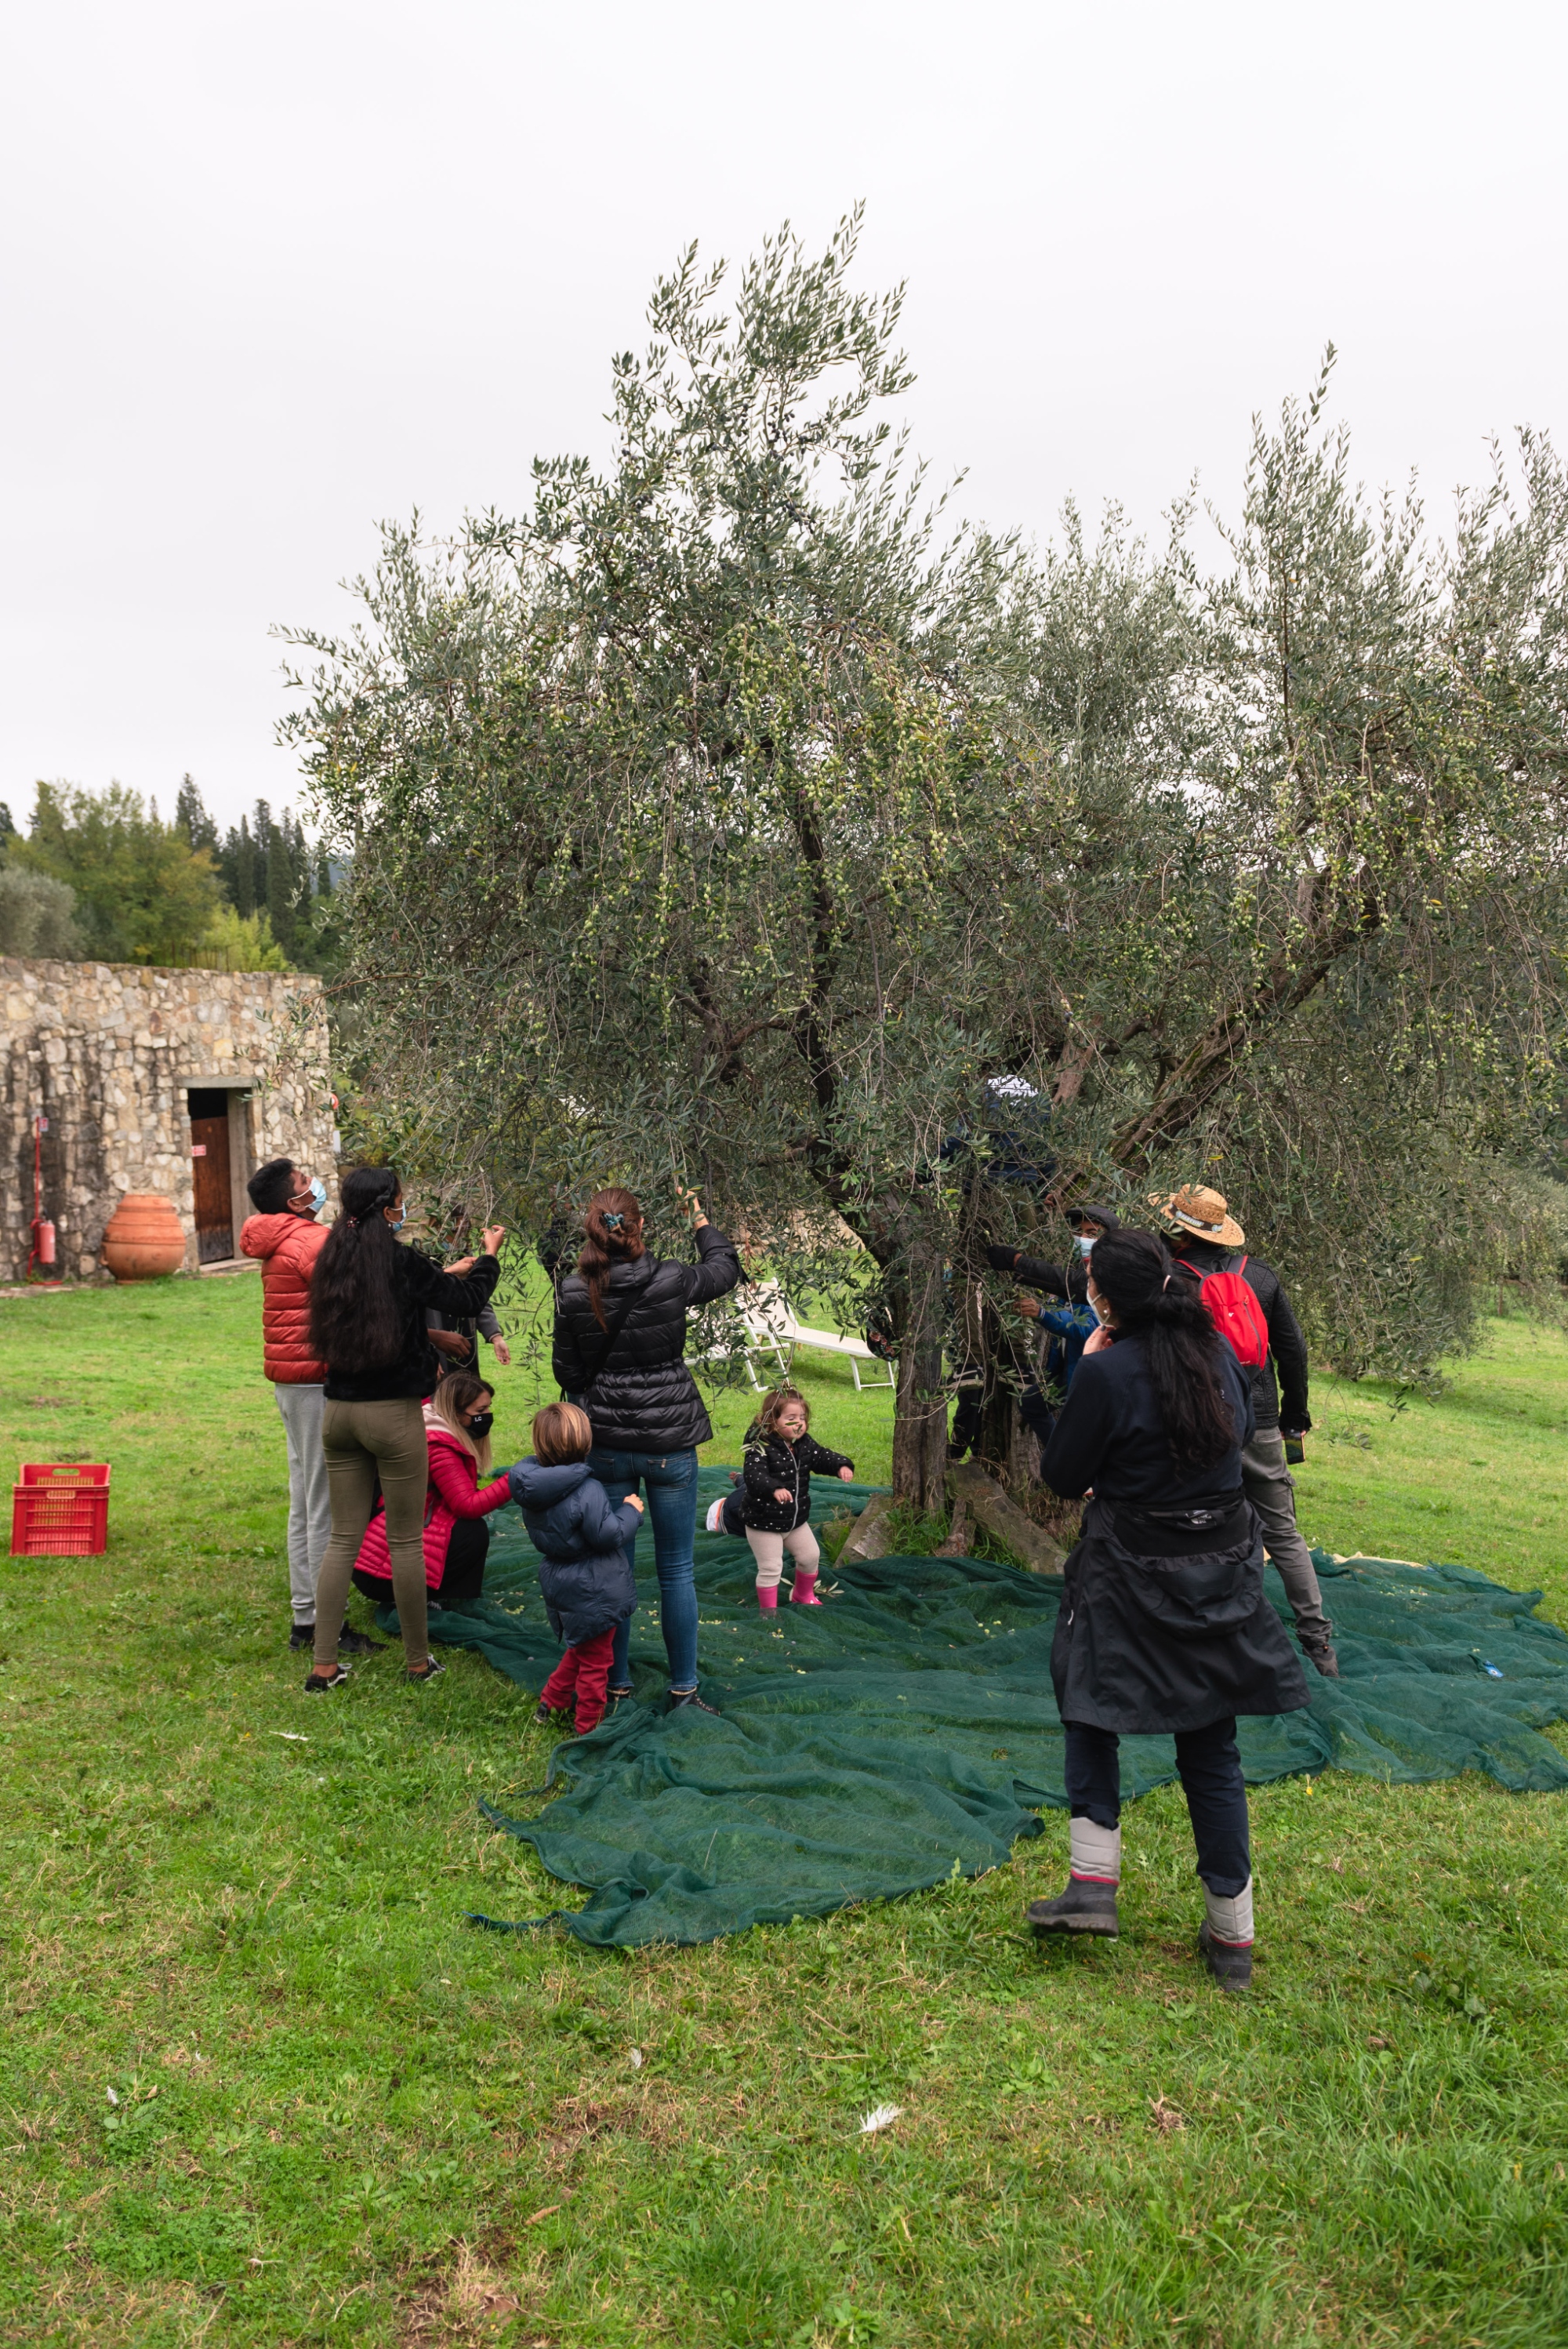 Fattoria di Maiano in Firenze offers experiences with children in Florence